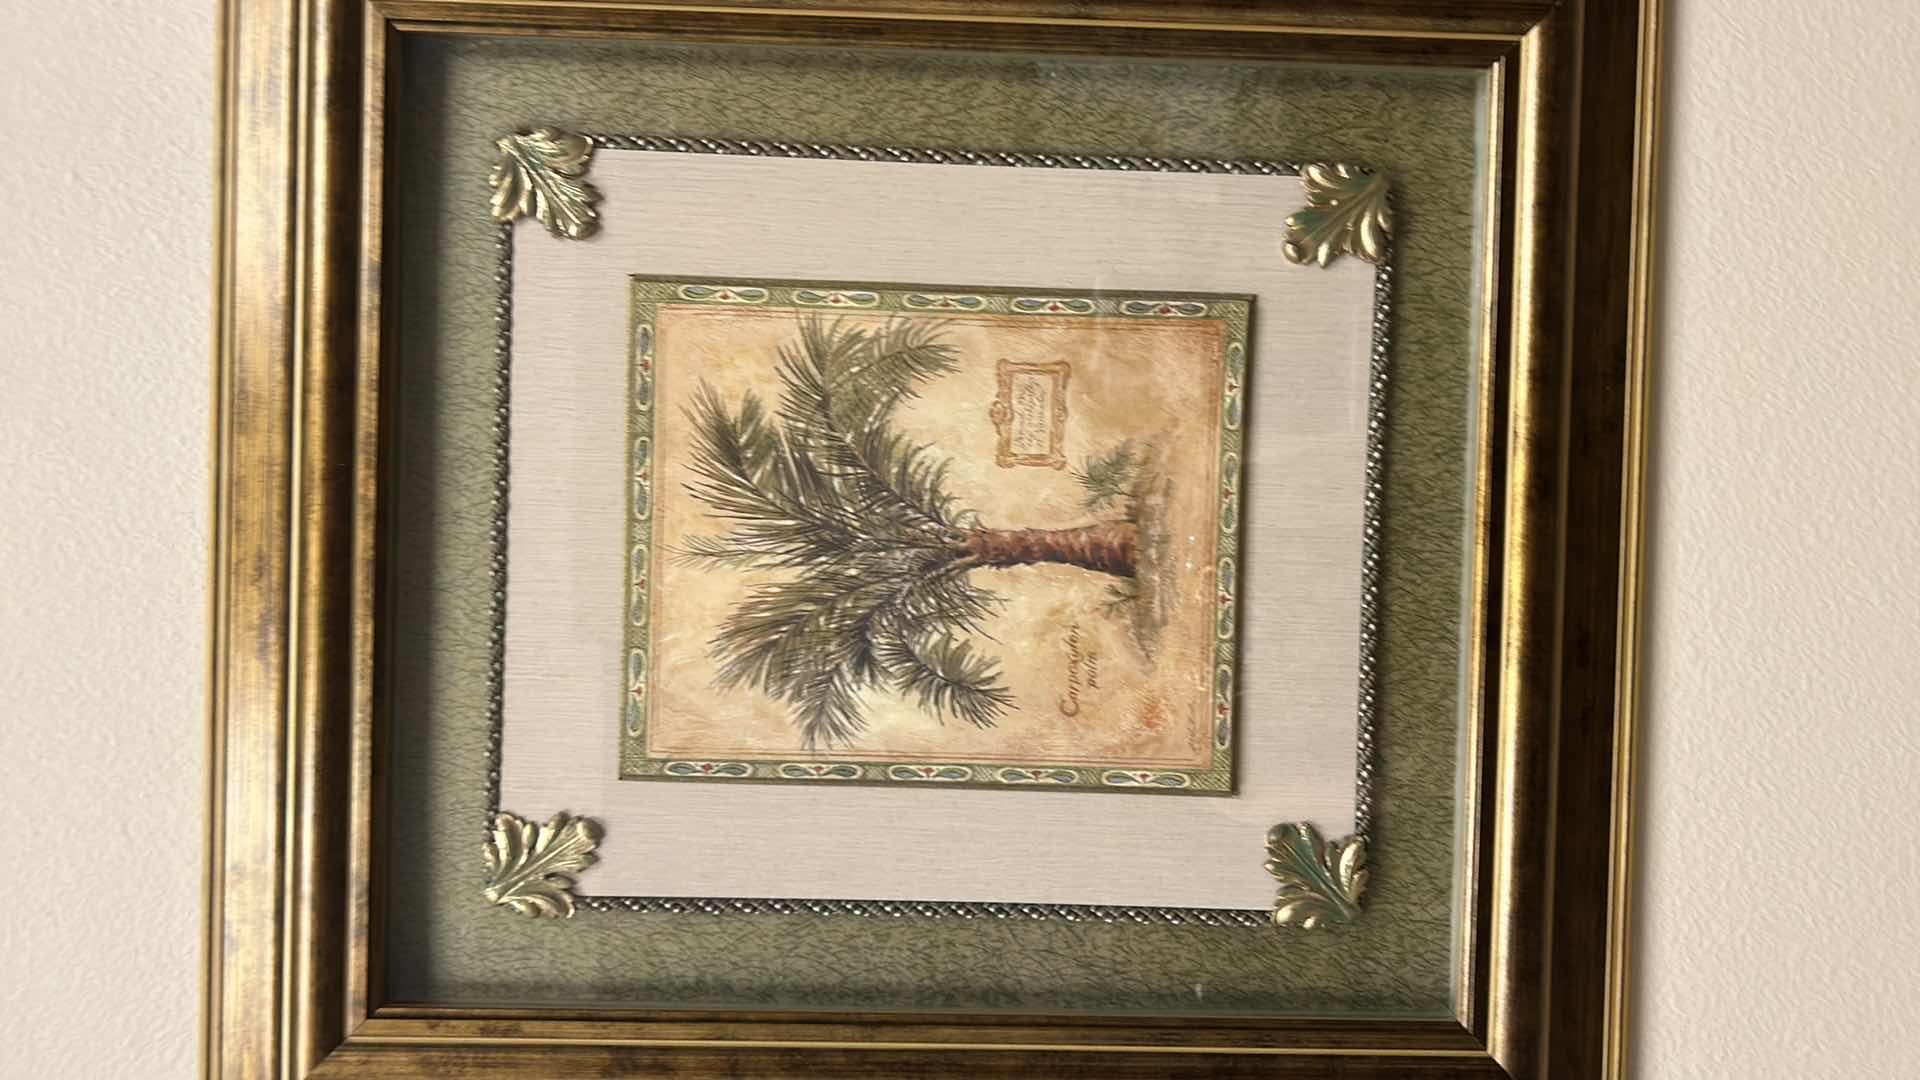 Photo 2 of GOLD TONED FRAMED DIMENSIONAL SHADOW BOX "PALM TREE" ARTWORK 23” x 25”